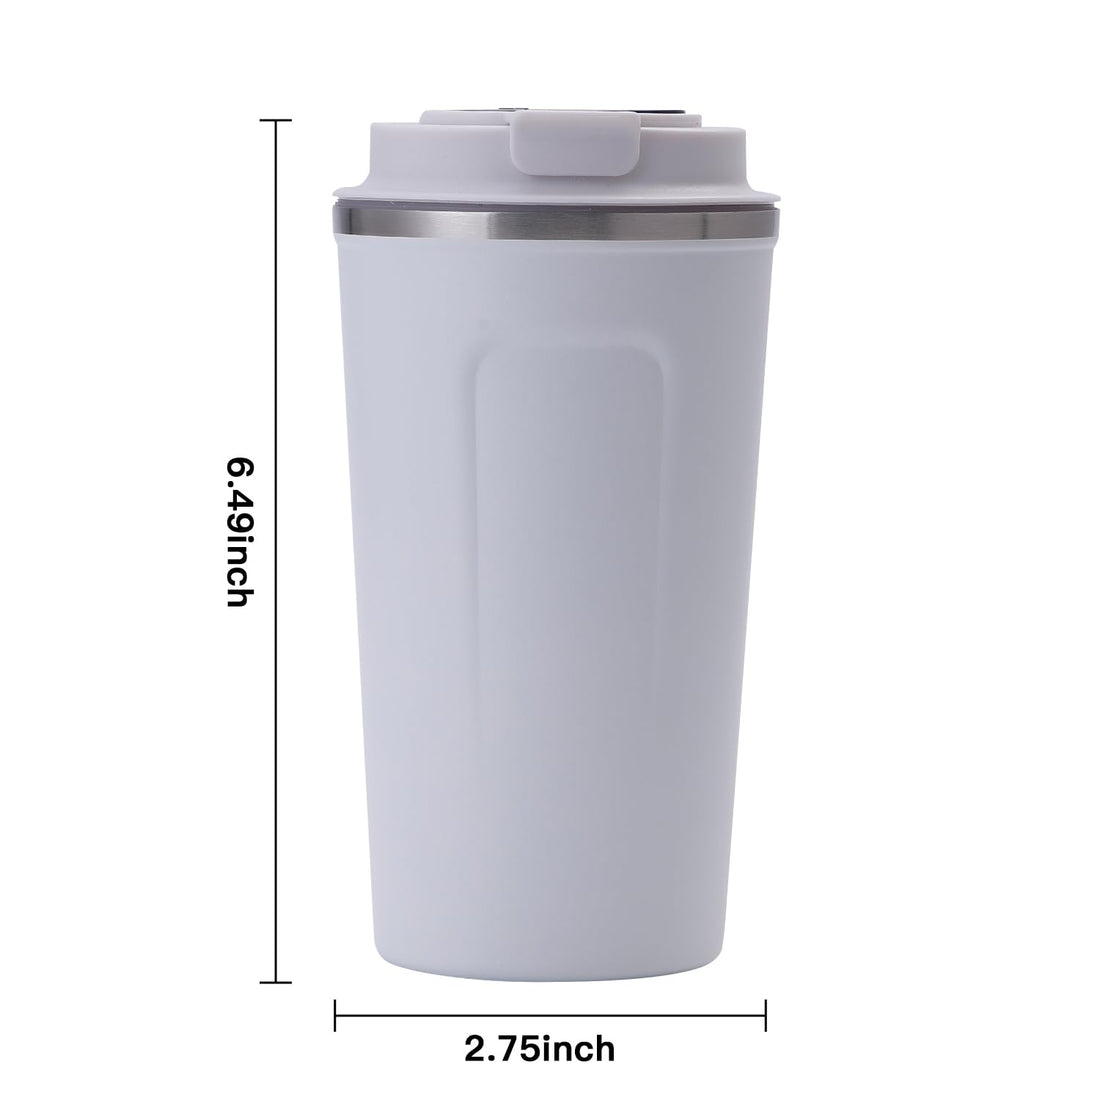 E-AOCJMH 17.2oz Insulated Coffee Mug with Smart LED Temperature Display, Reusable Stainless Steel Coffee Cup Double Wall Vacuum Insulated Water Bottle for Hot and Cold Water Coffee (CWB White)